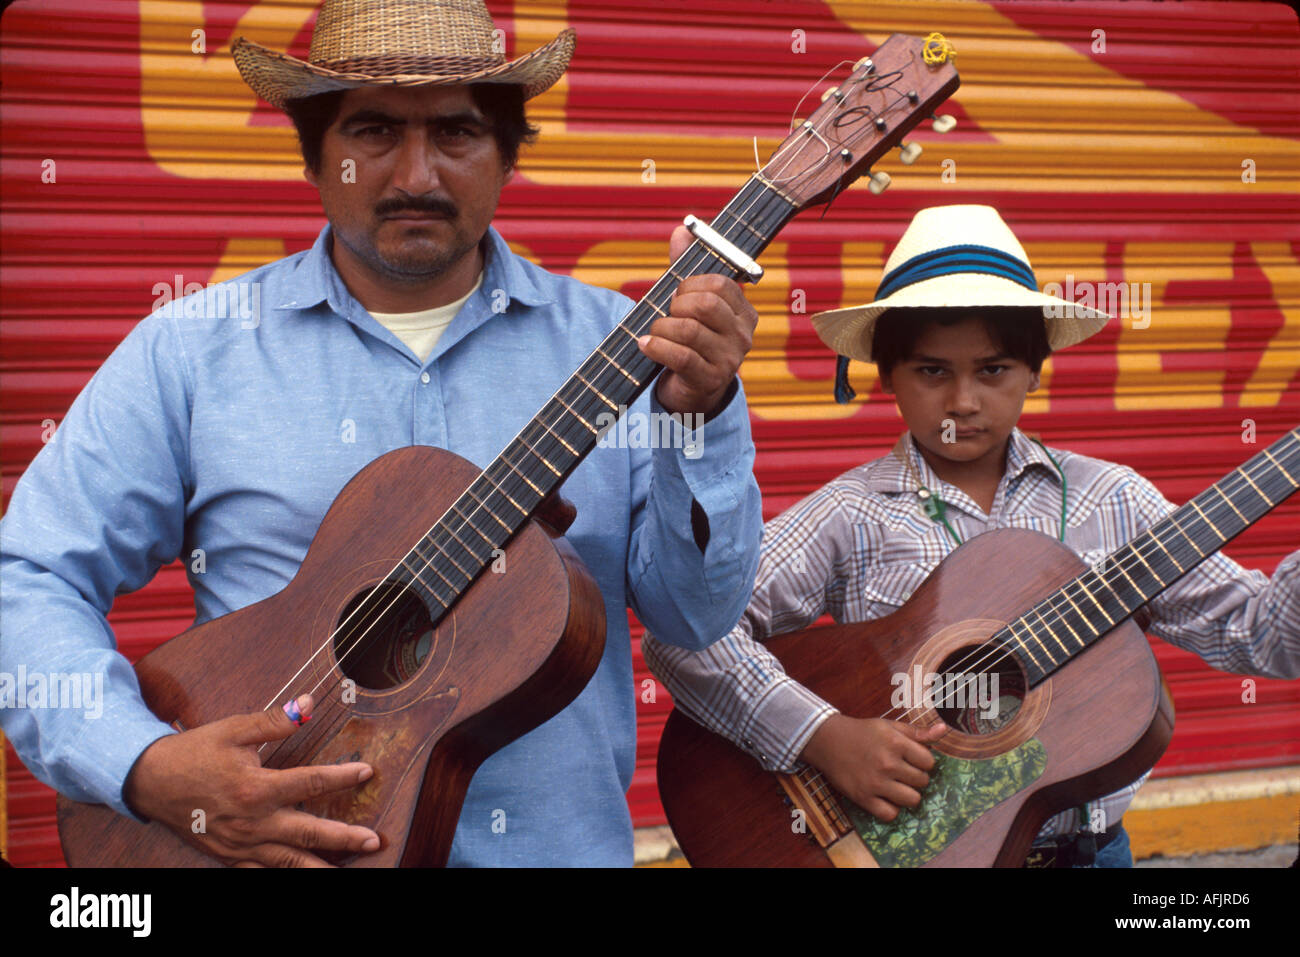 Mexico,Mexican,Central America,Pan,North Hispanic Mestizo,Quintana Roo Chetumal,traveling troubadours,father,parent parents,parent,& son play for tips Stock Photo